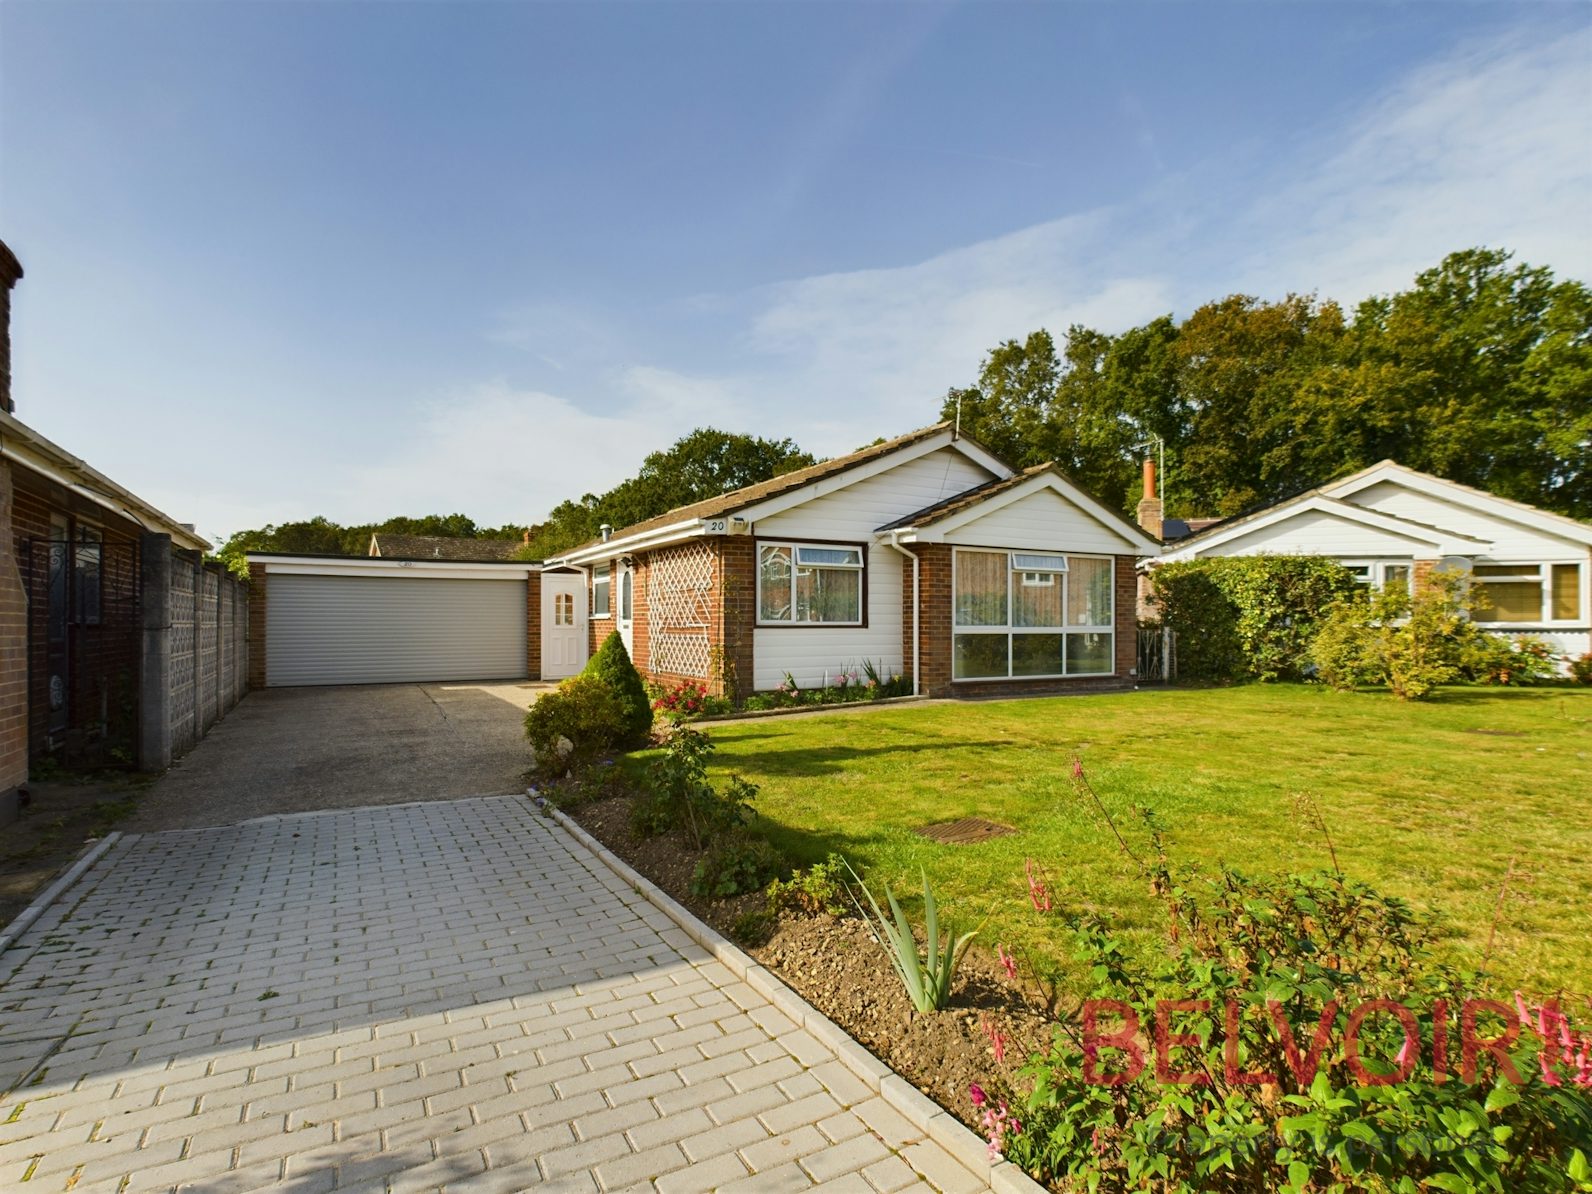 Bungalow for sale on Dukes Ride Silchester, RG7